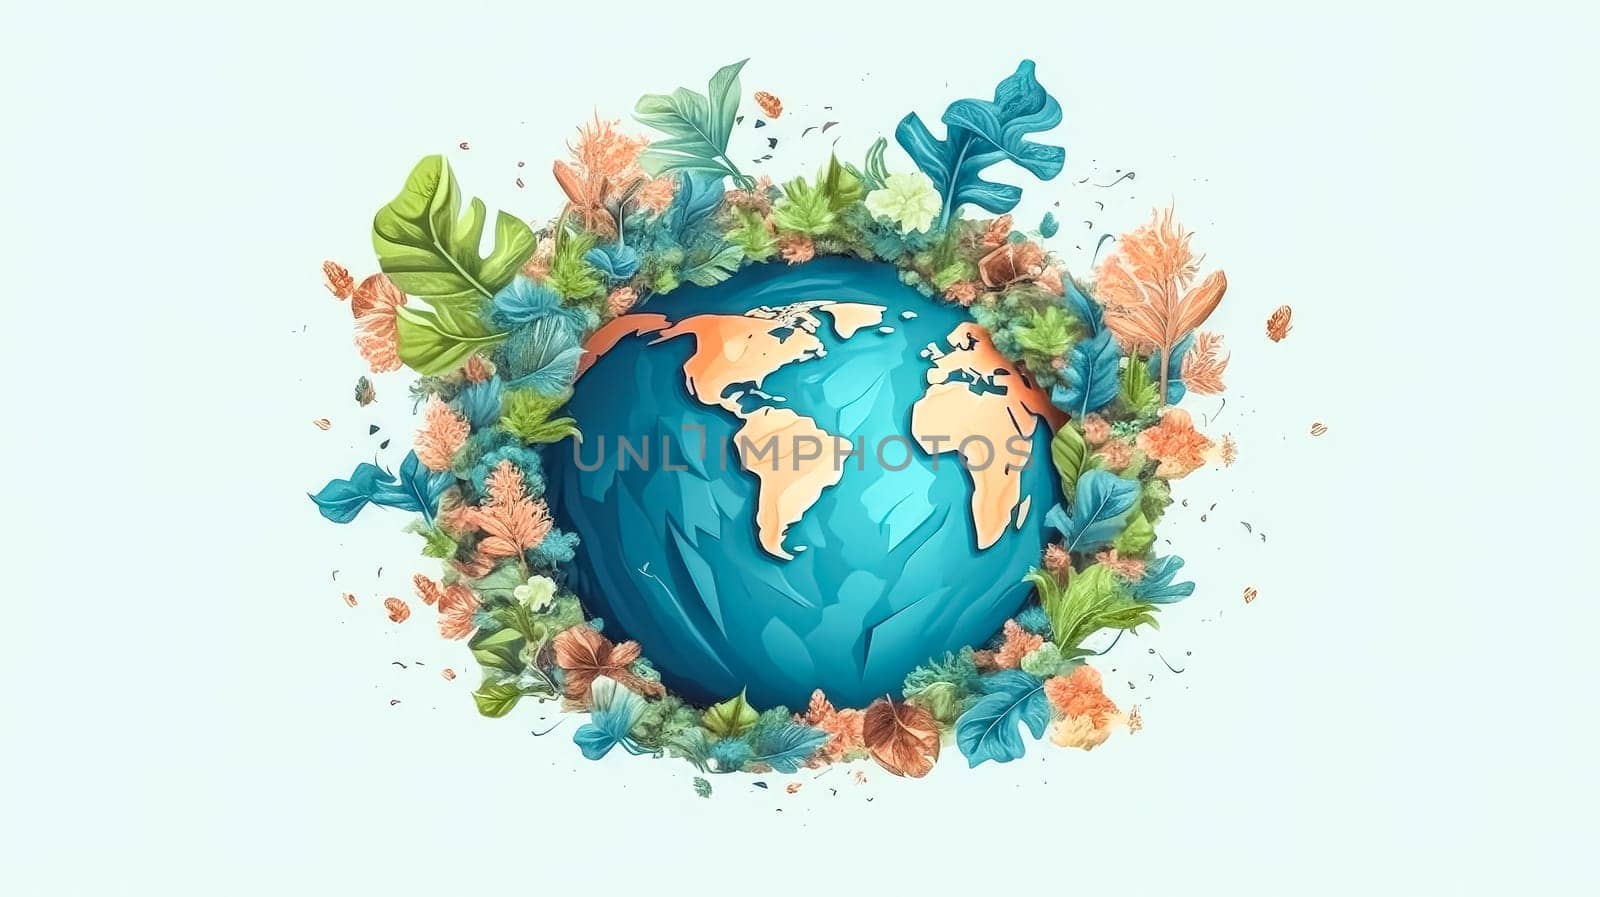 Verdant planet, Earth adorned with green grass and trees, a jubilant scene symbolizing natures resilience and the spirit of Earth Day rejoicing